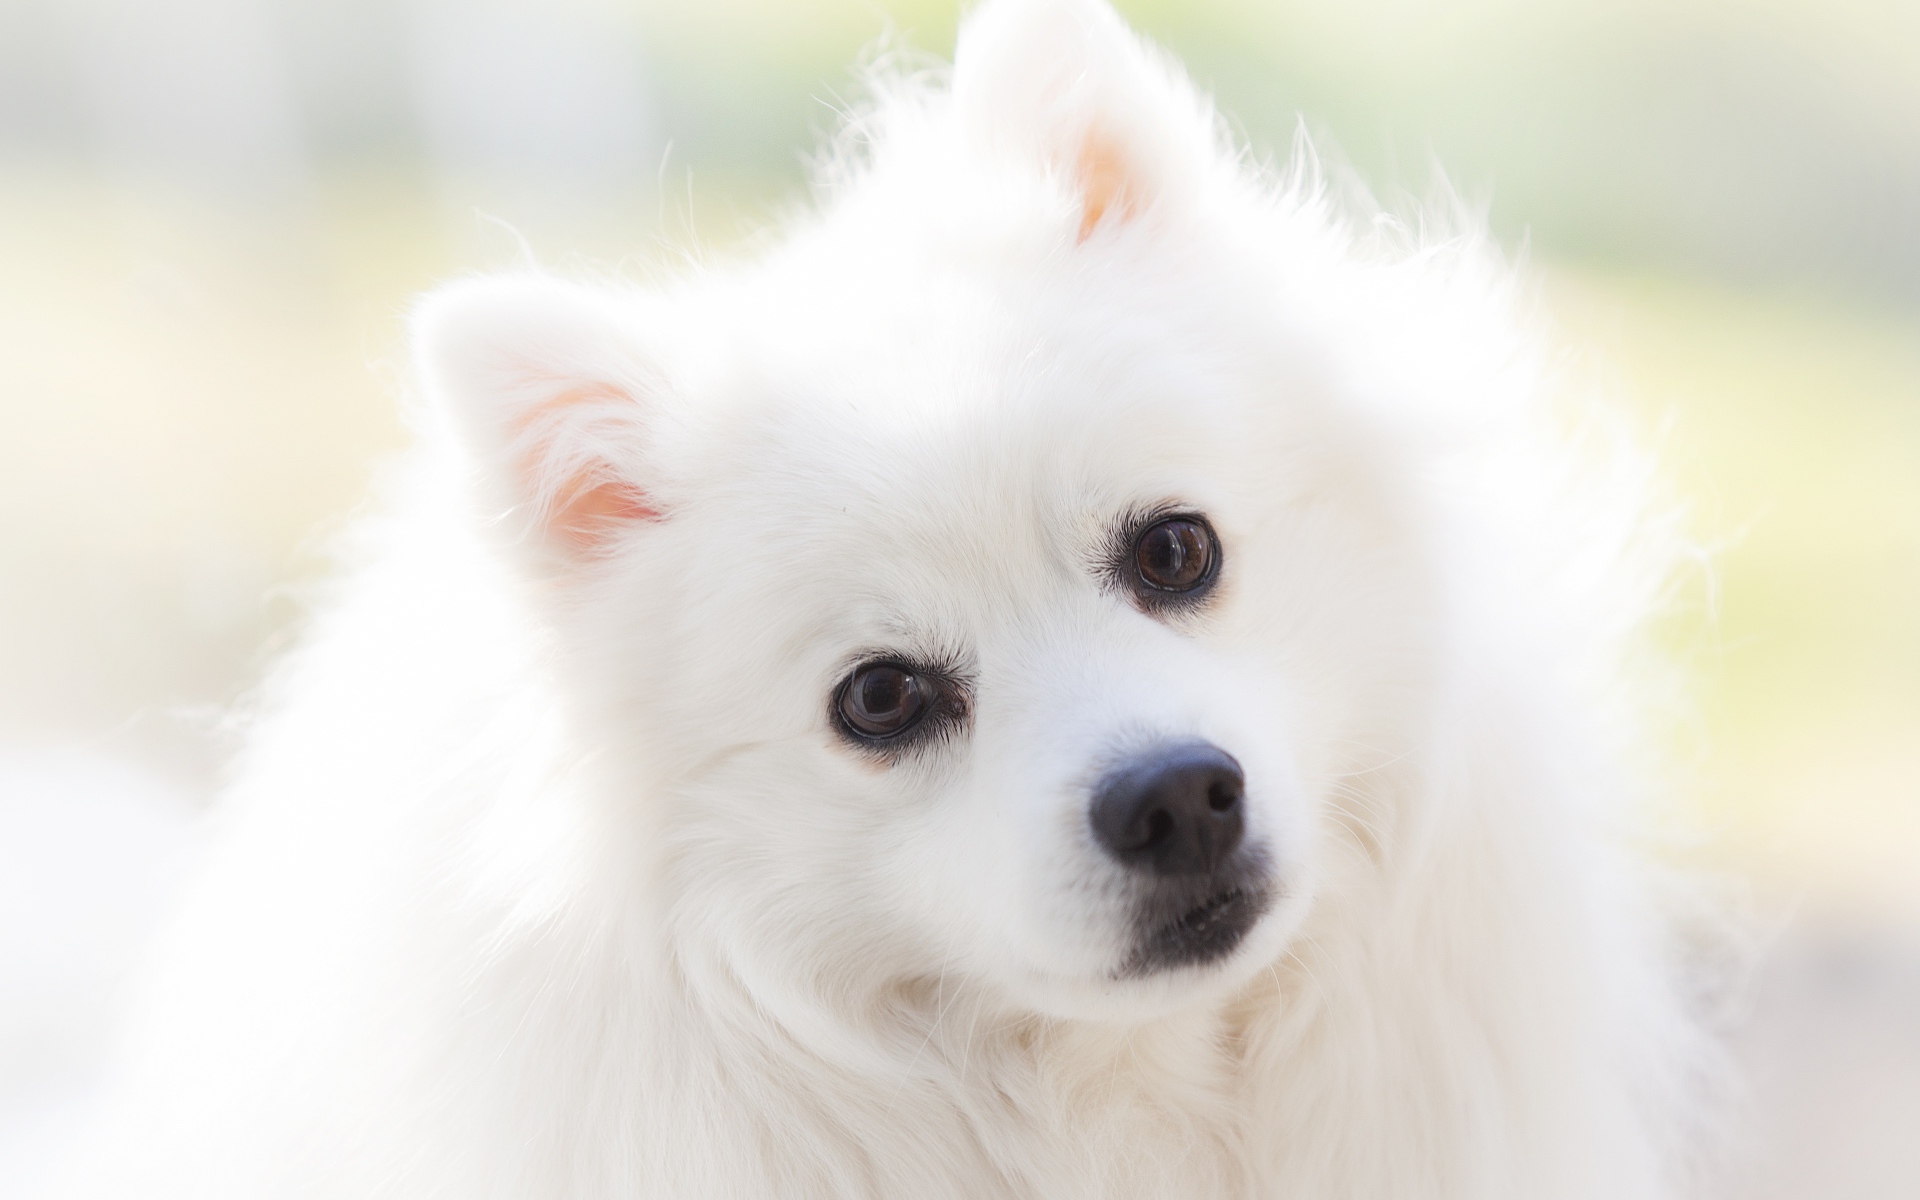 Look of a white brown-eyed fluffy dog